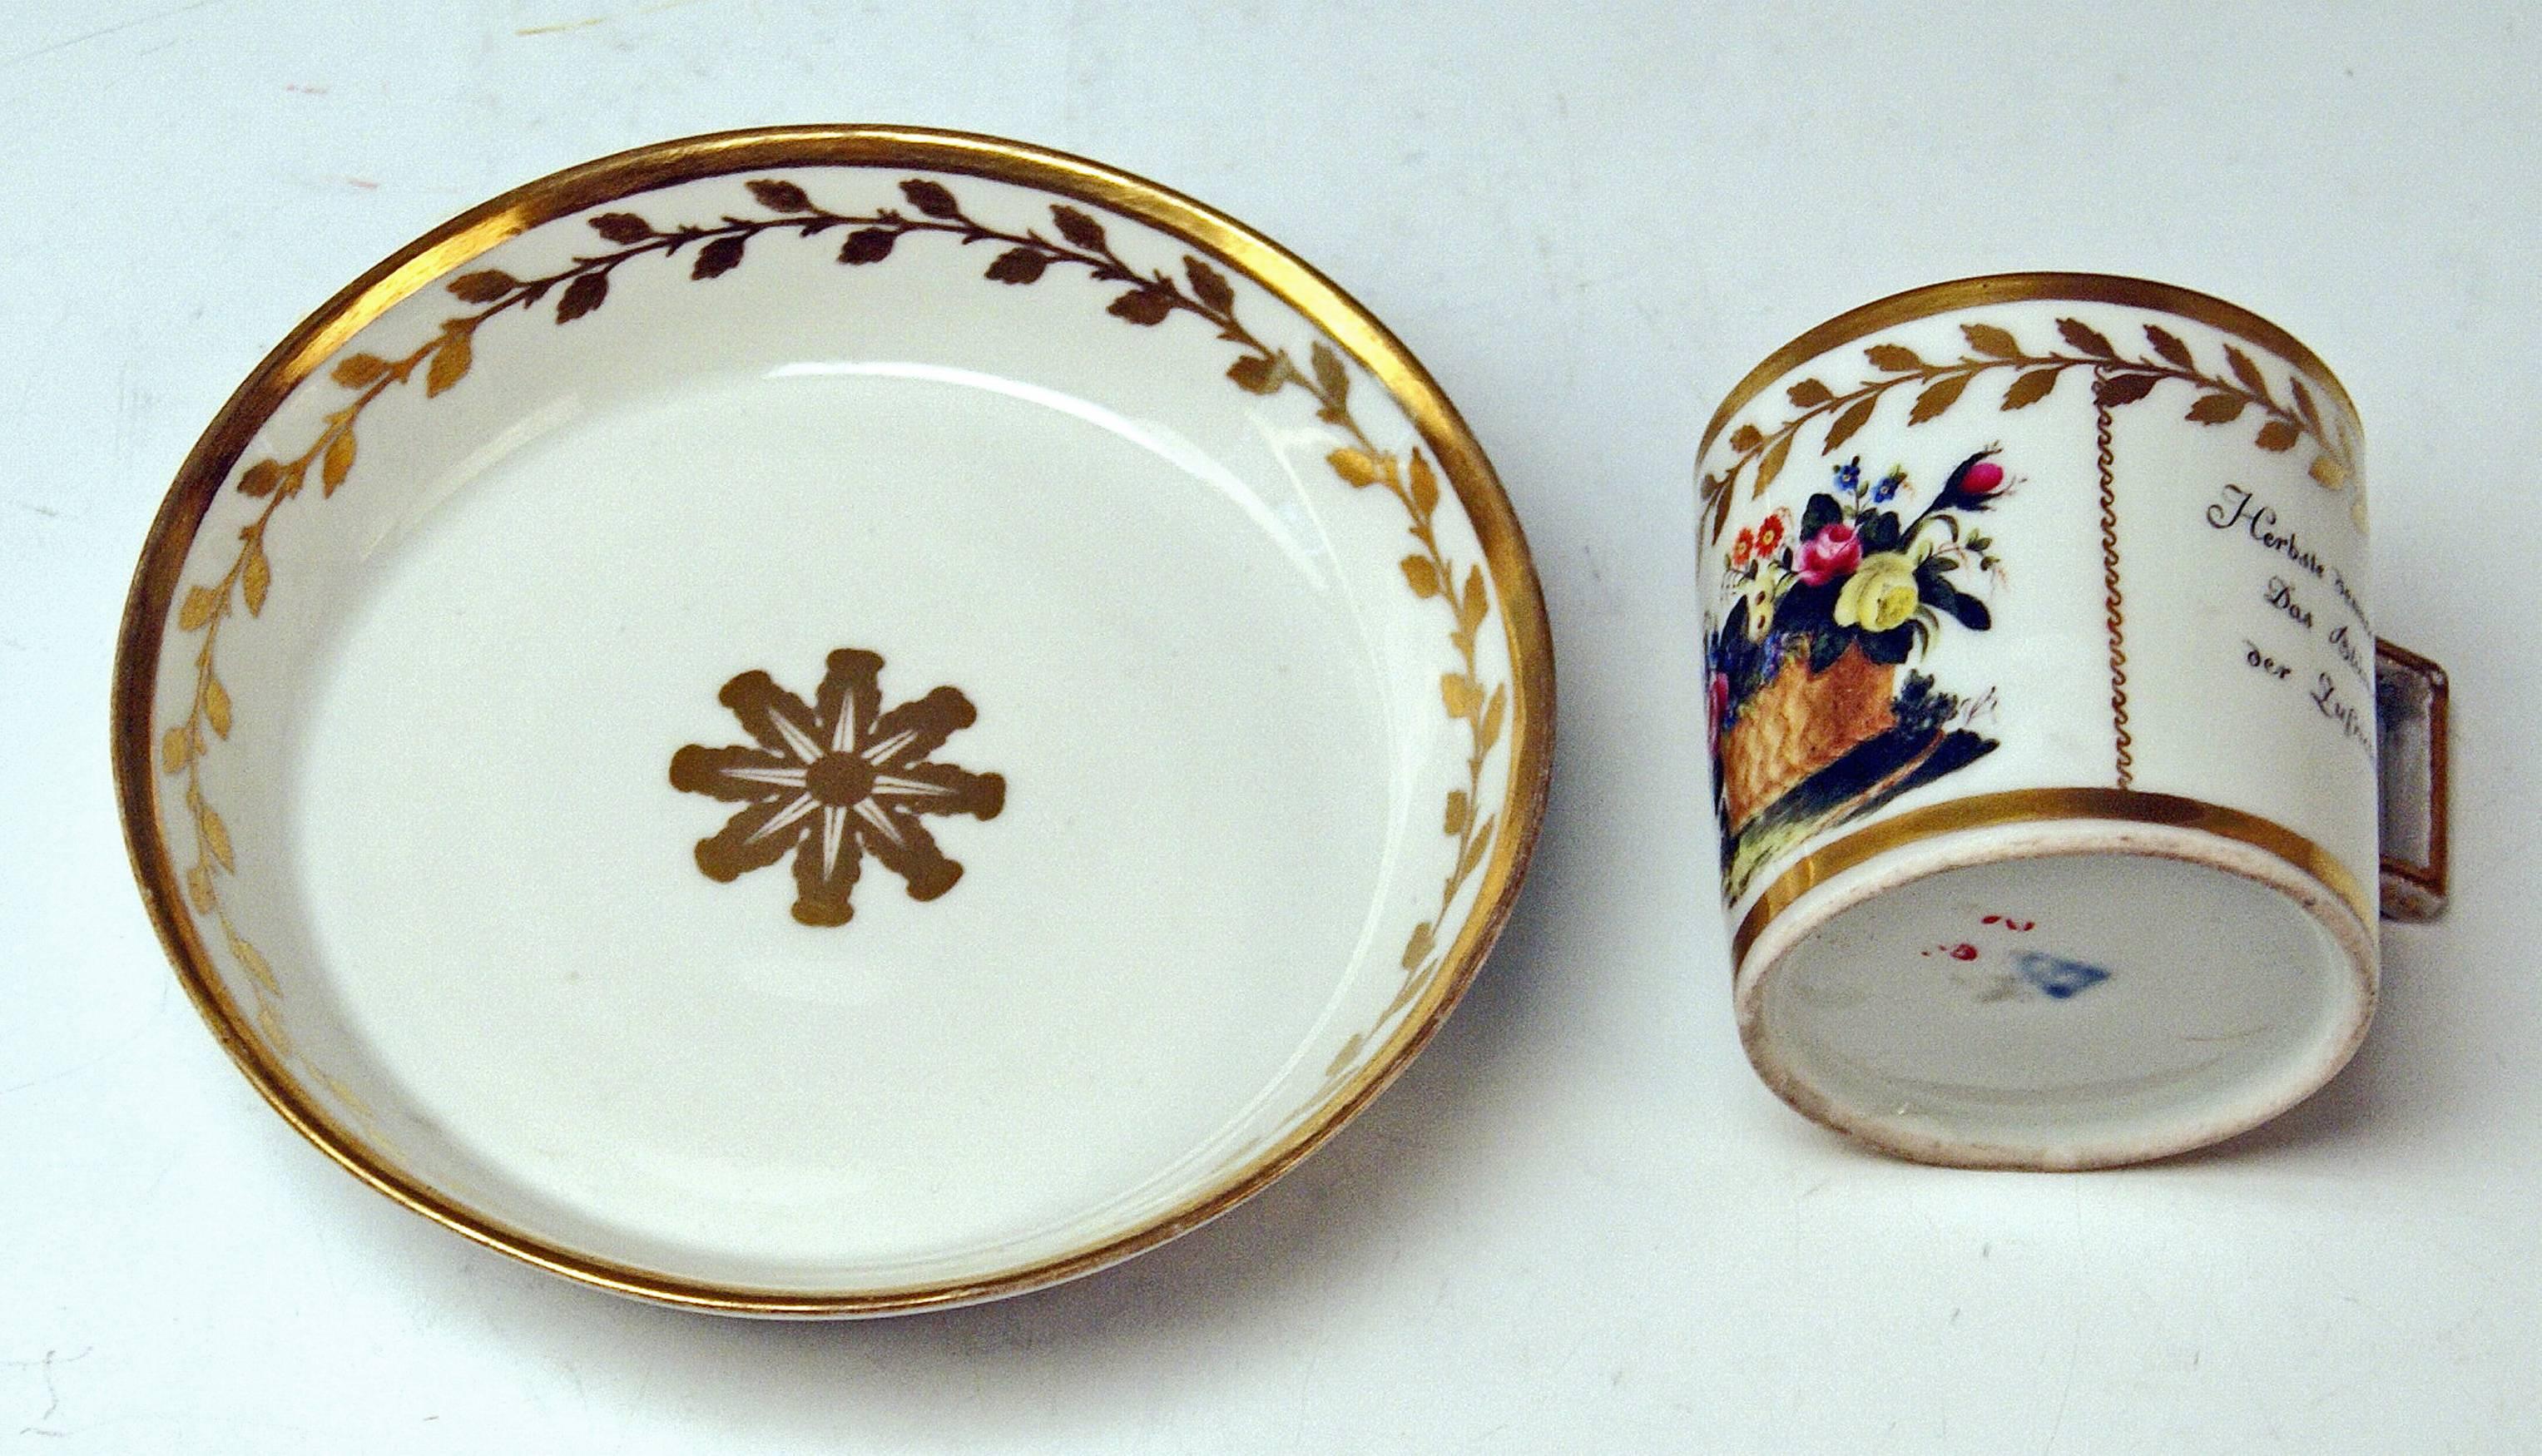 Early 19th Century Vienna Imperial Porcelain Cup Saucer Golden Ornaments Dictum and Flowers, 1816